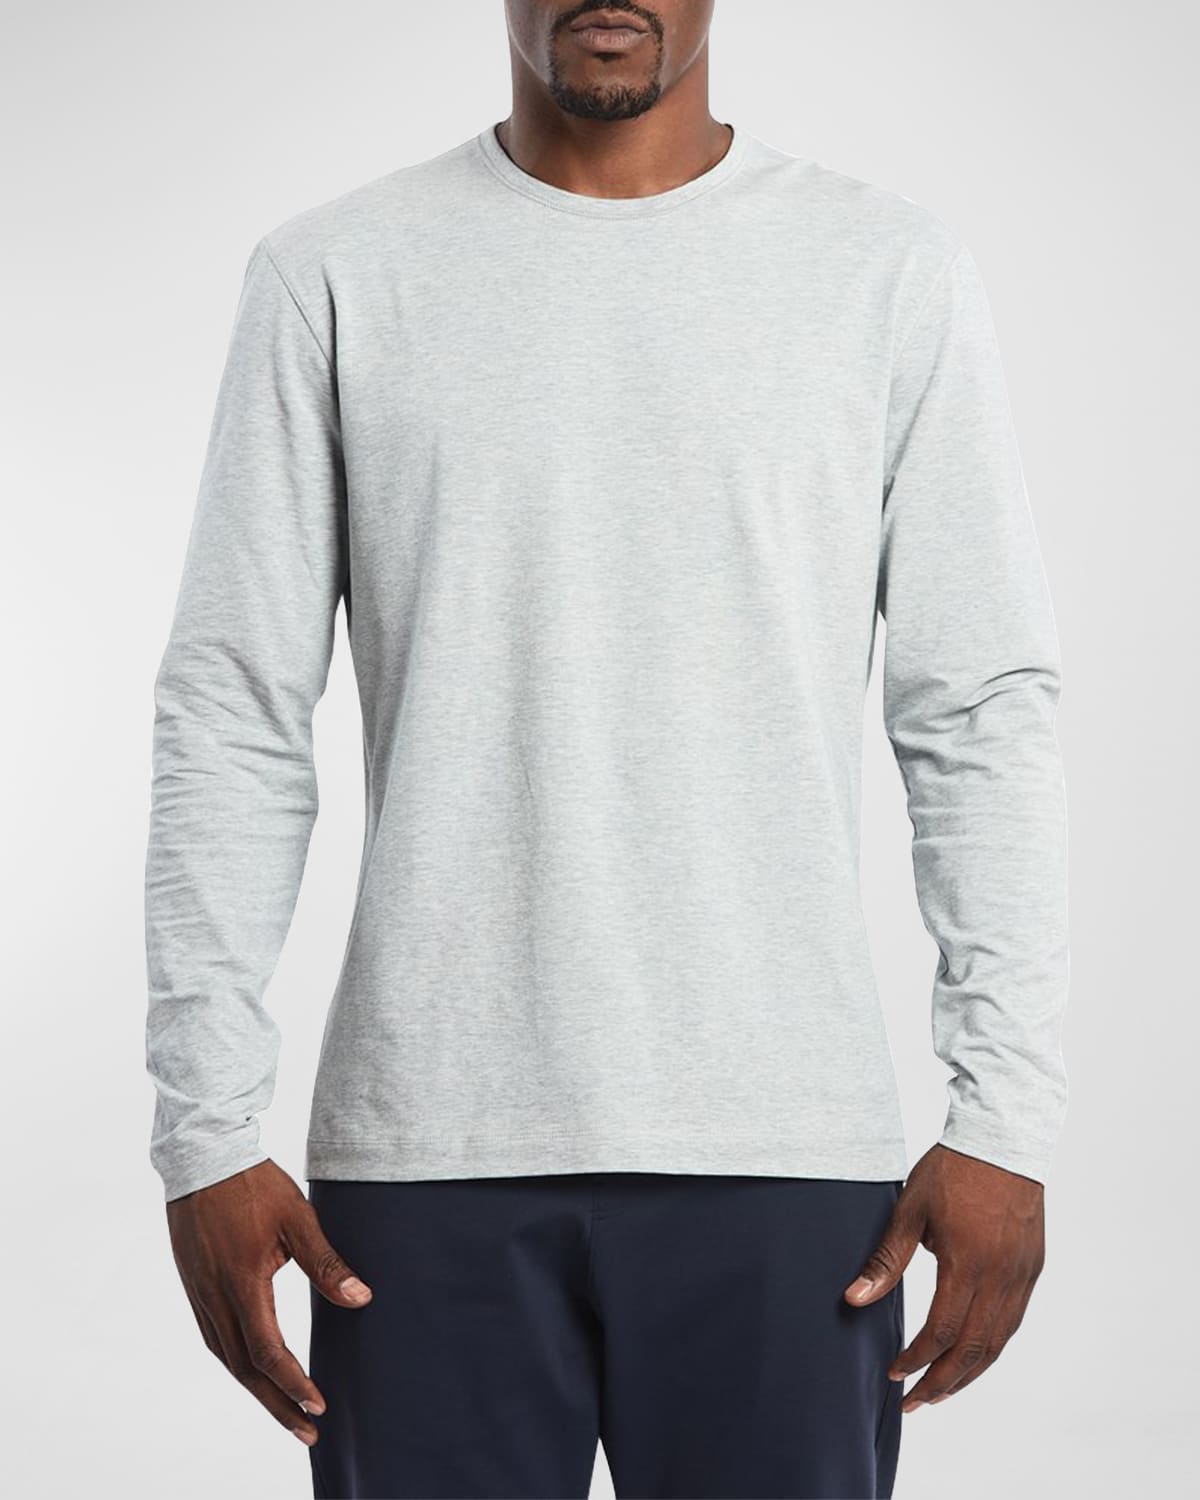 Men's Go-To Athletic T-Shirt